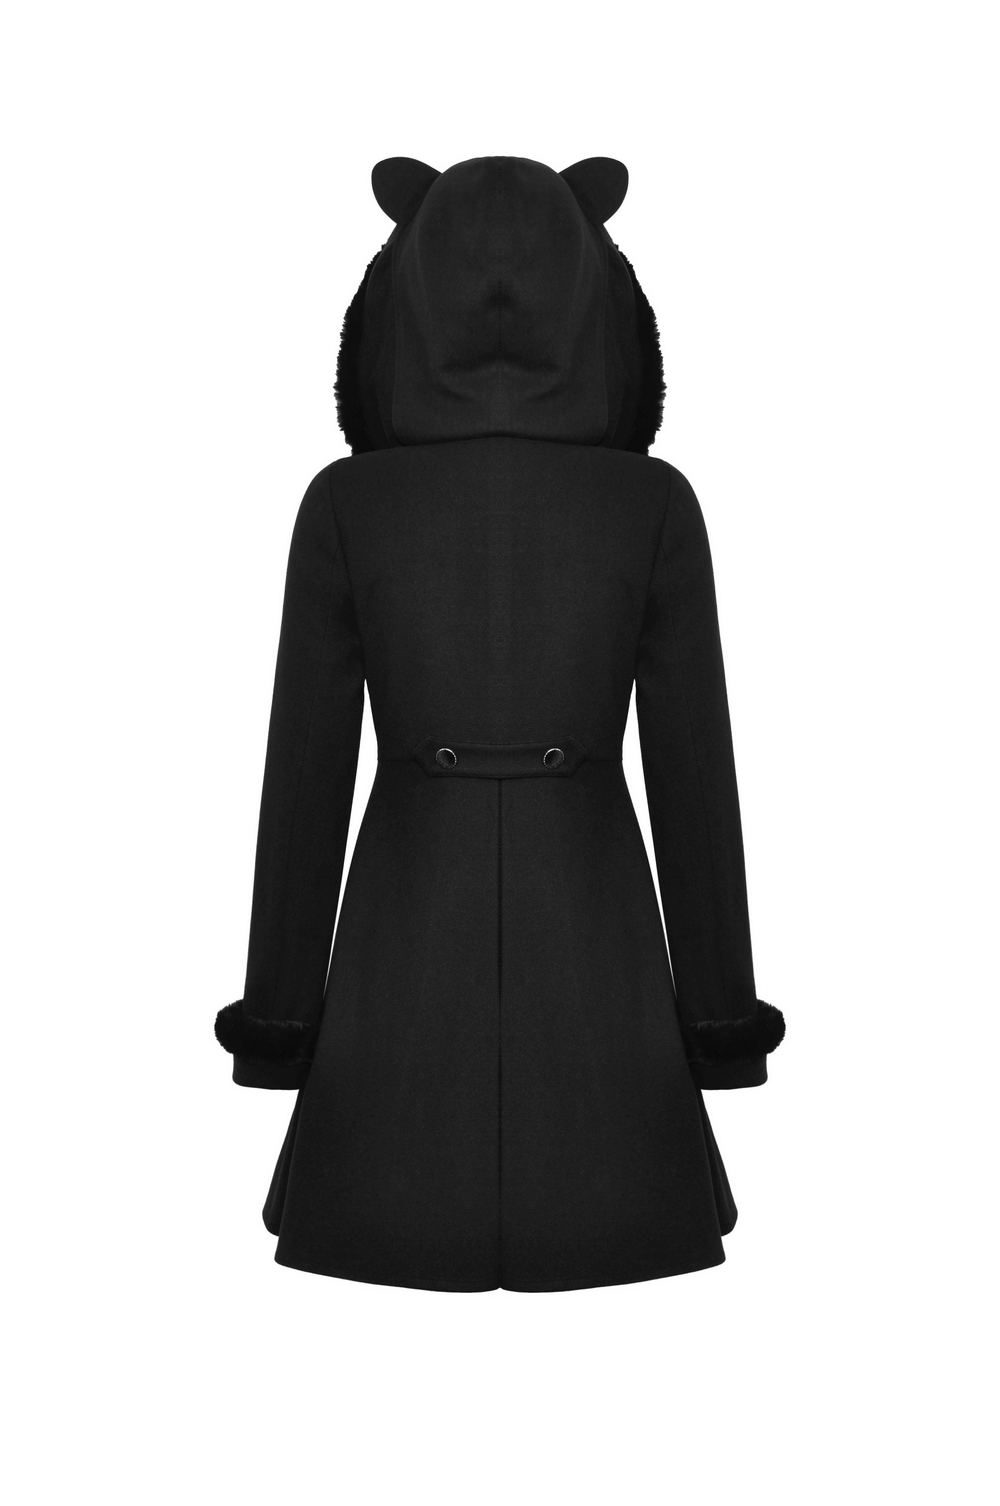 Gothic Cat Ear Hooded Coat with Velvet Red Lining